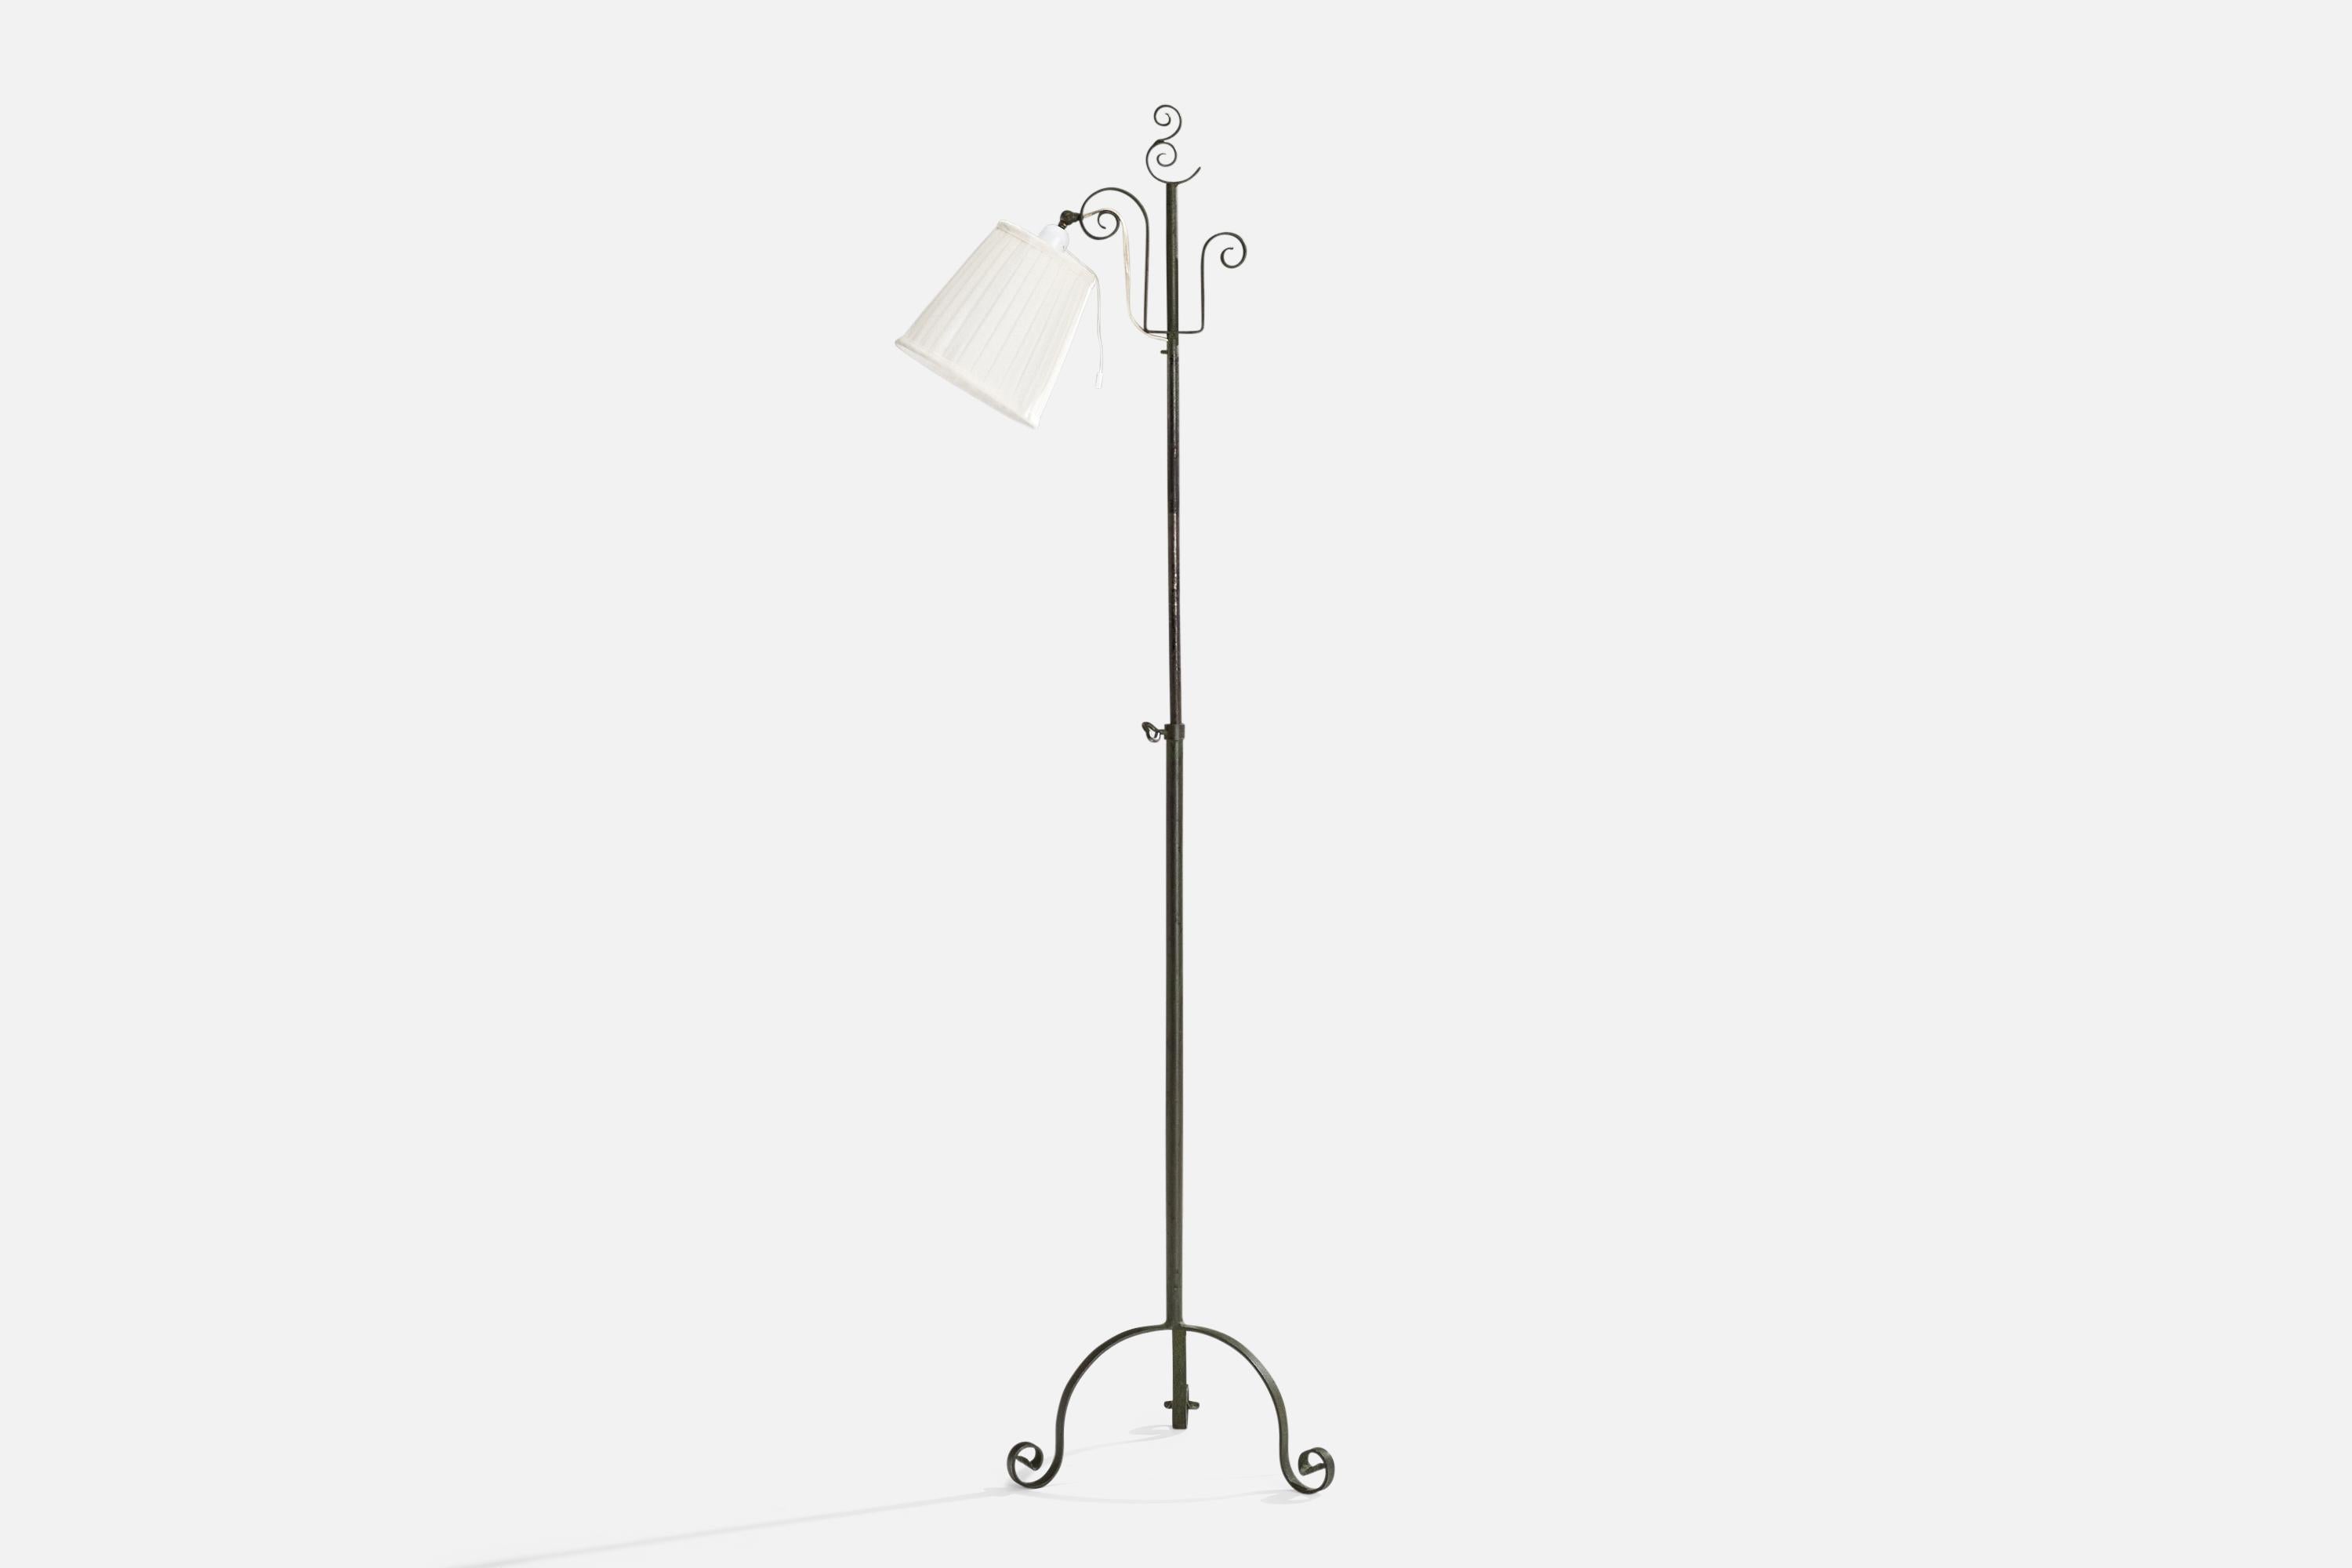 An adjustable wrought iron and beige fabric floor lamp, variation of model 15101, designed by Harald Notini and produced by Böhlmarks, Sweden, 1930s.

Dimensions variable 
Overall Dimensions (inches): 51.75” H x 7.75” W x 18” D
Stated dimensions